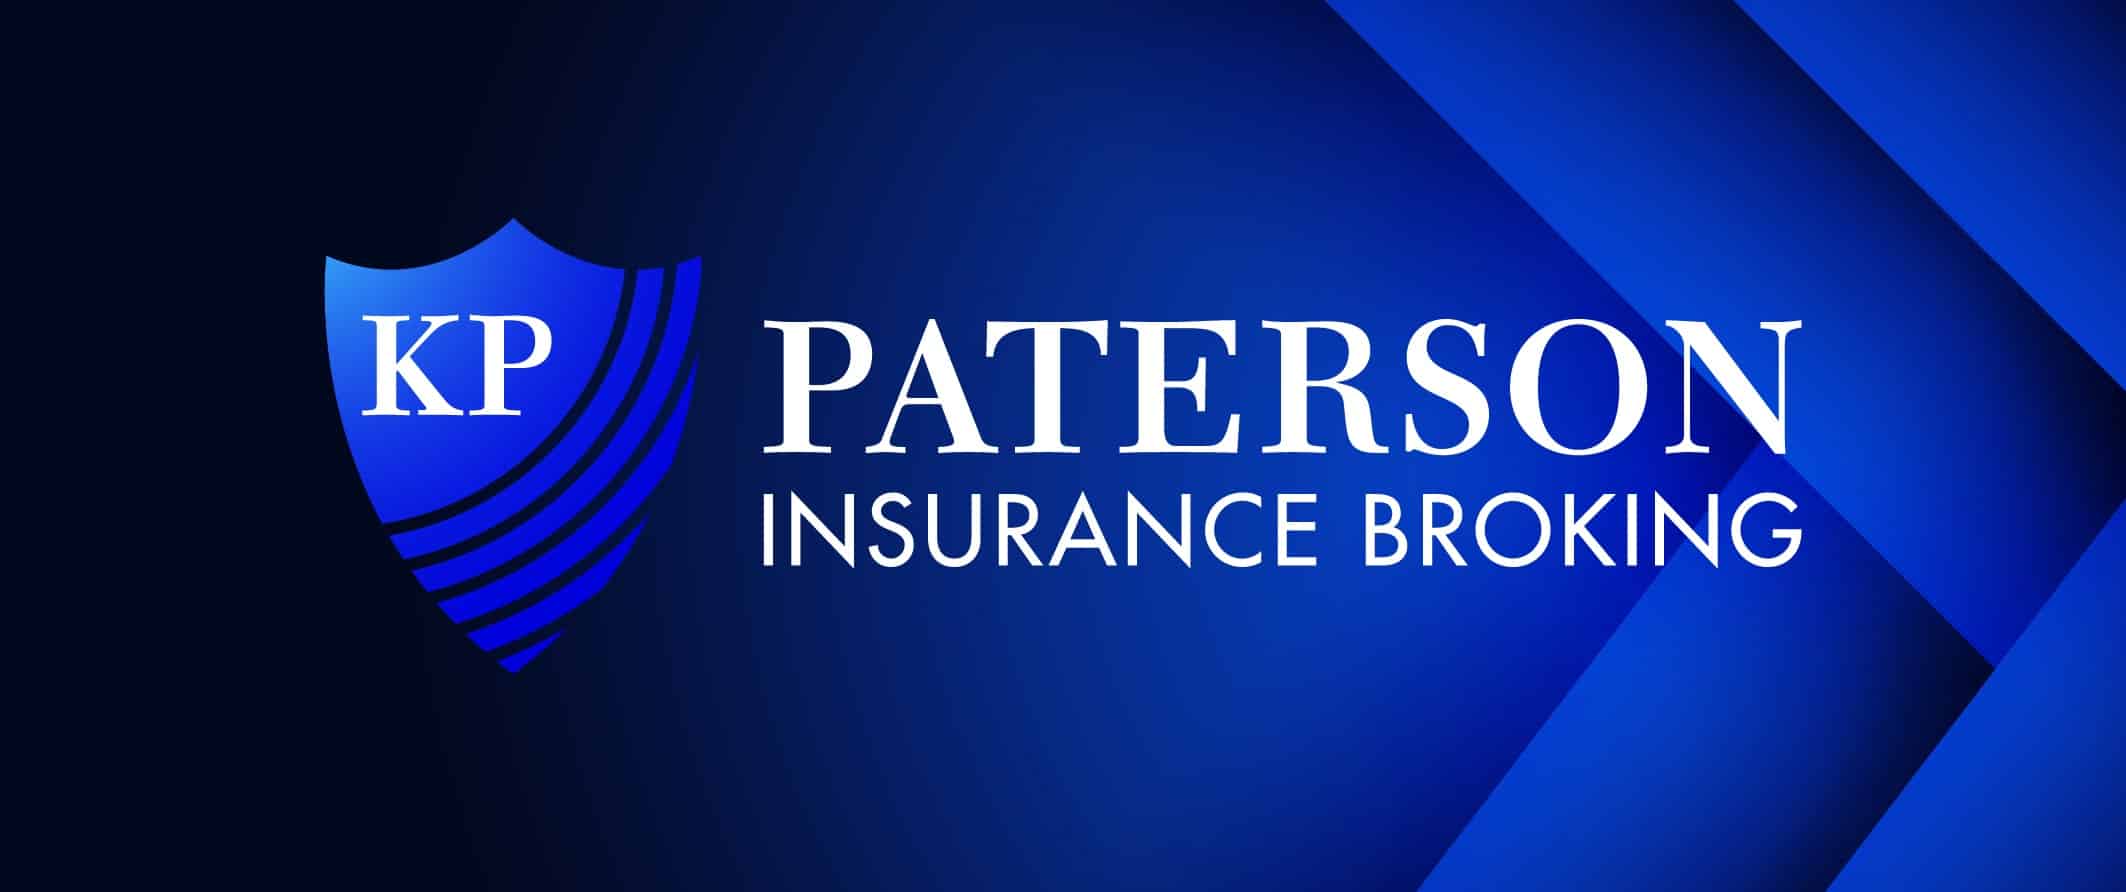 Paterson Insurance Broking